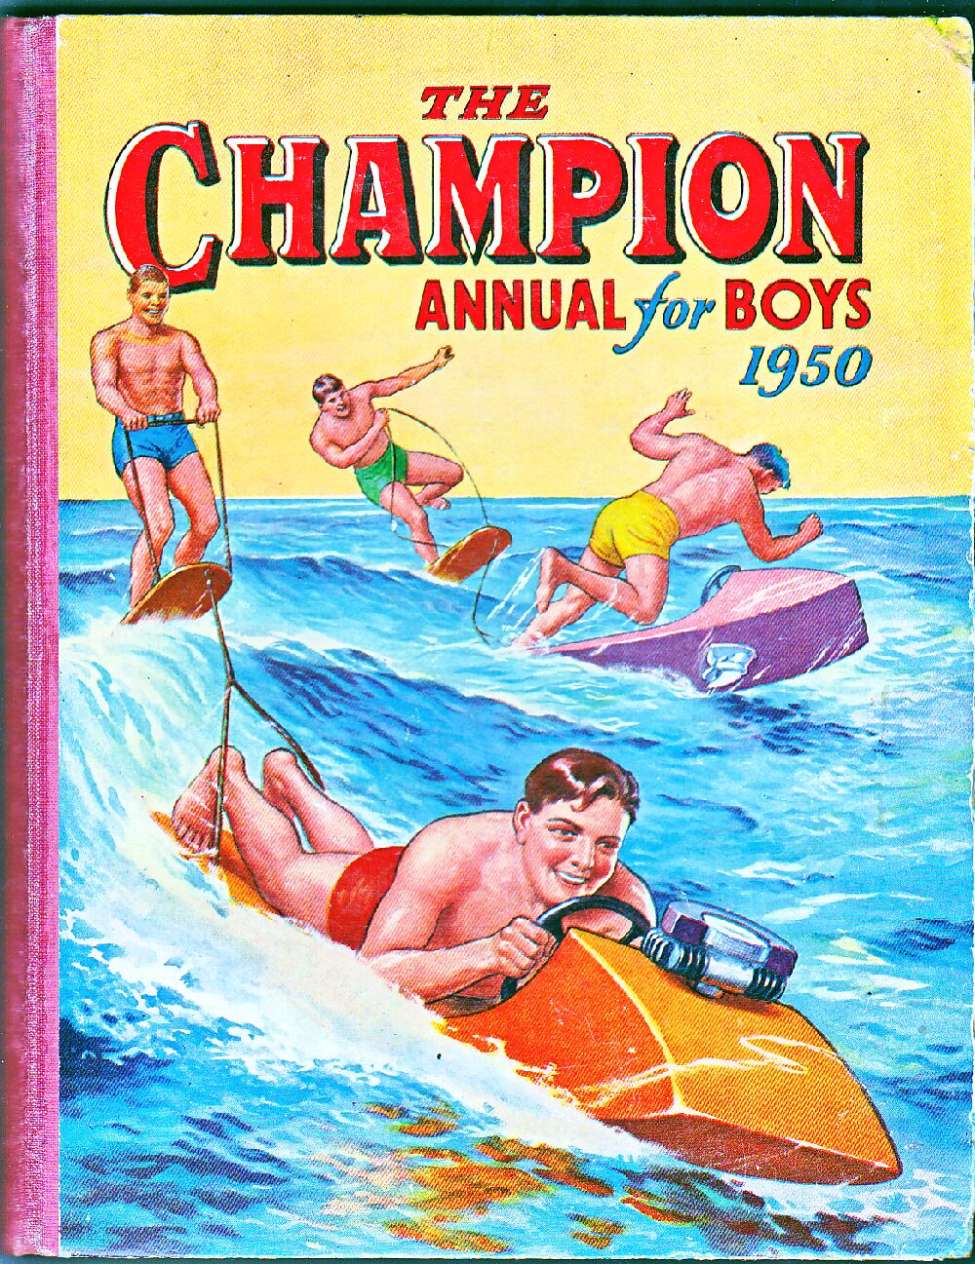 Book Cover For The Champion Annual for Boys 1950